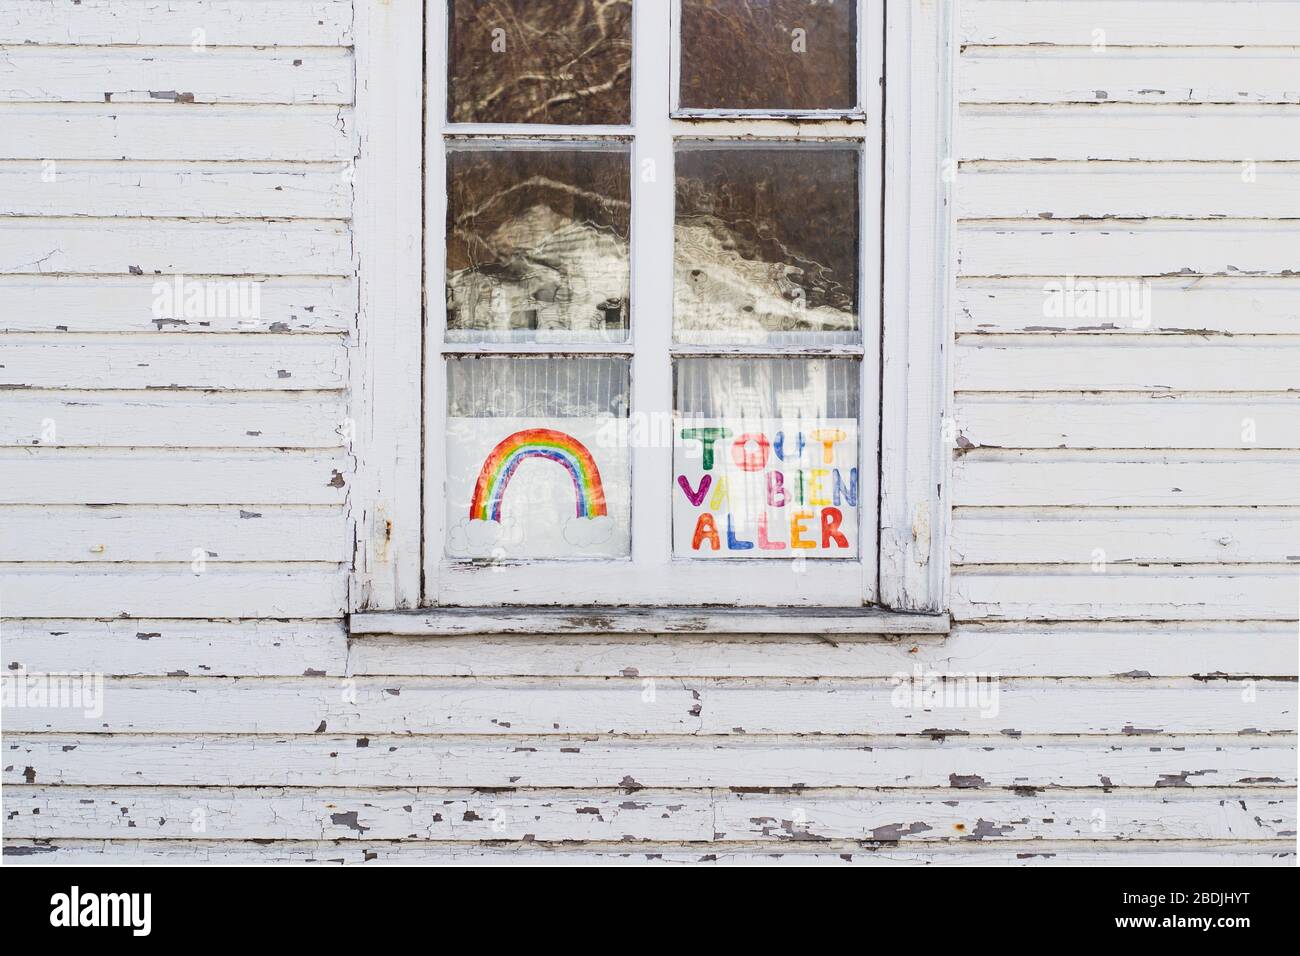 Rainbows drawing with the message"Everything will be fine" written in french, displayed in windows Stock Photo